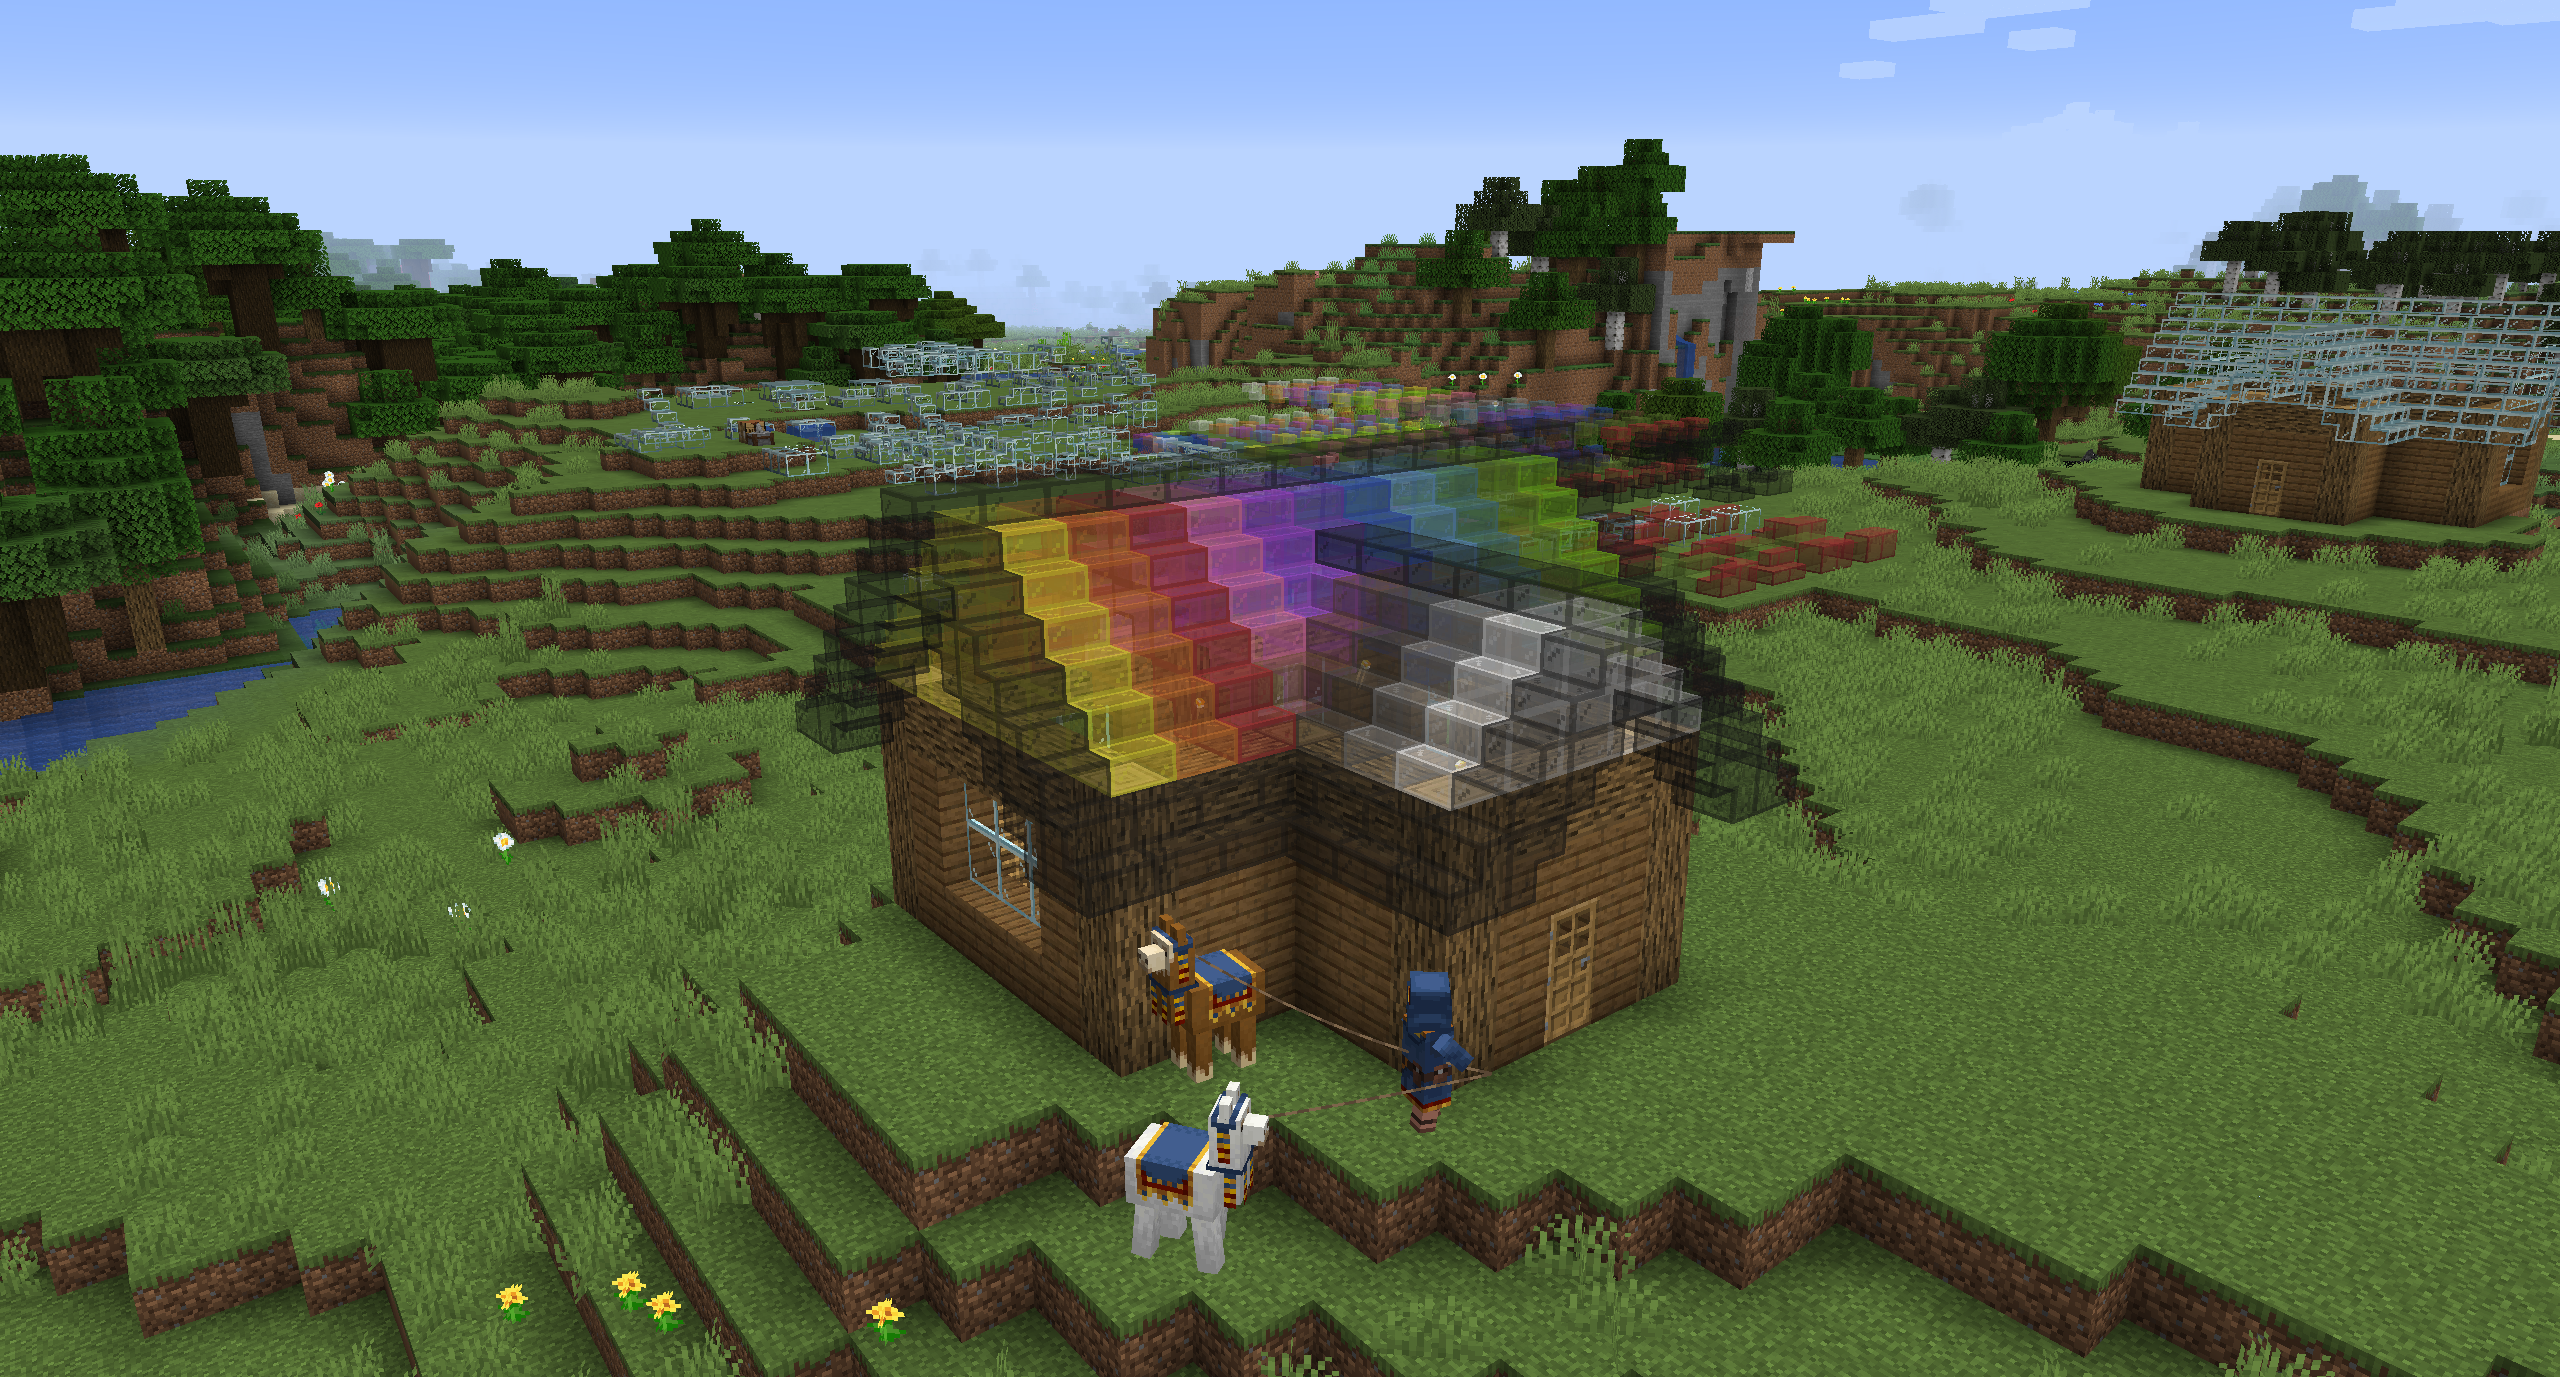 House with rainbow glass roof